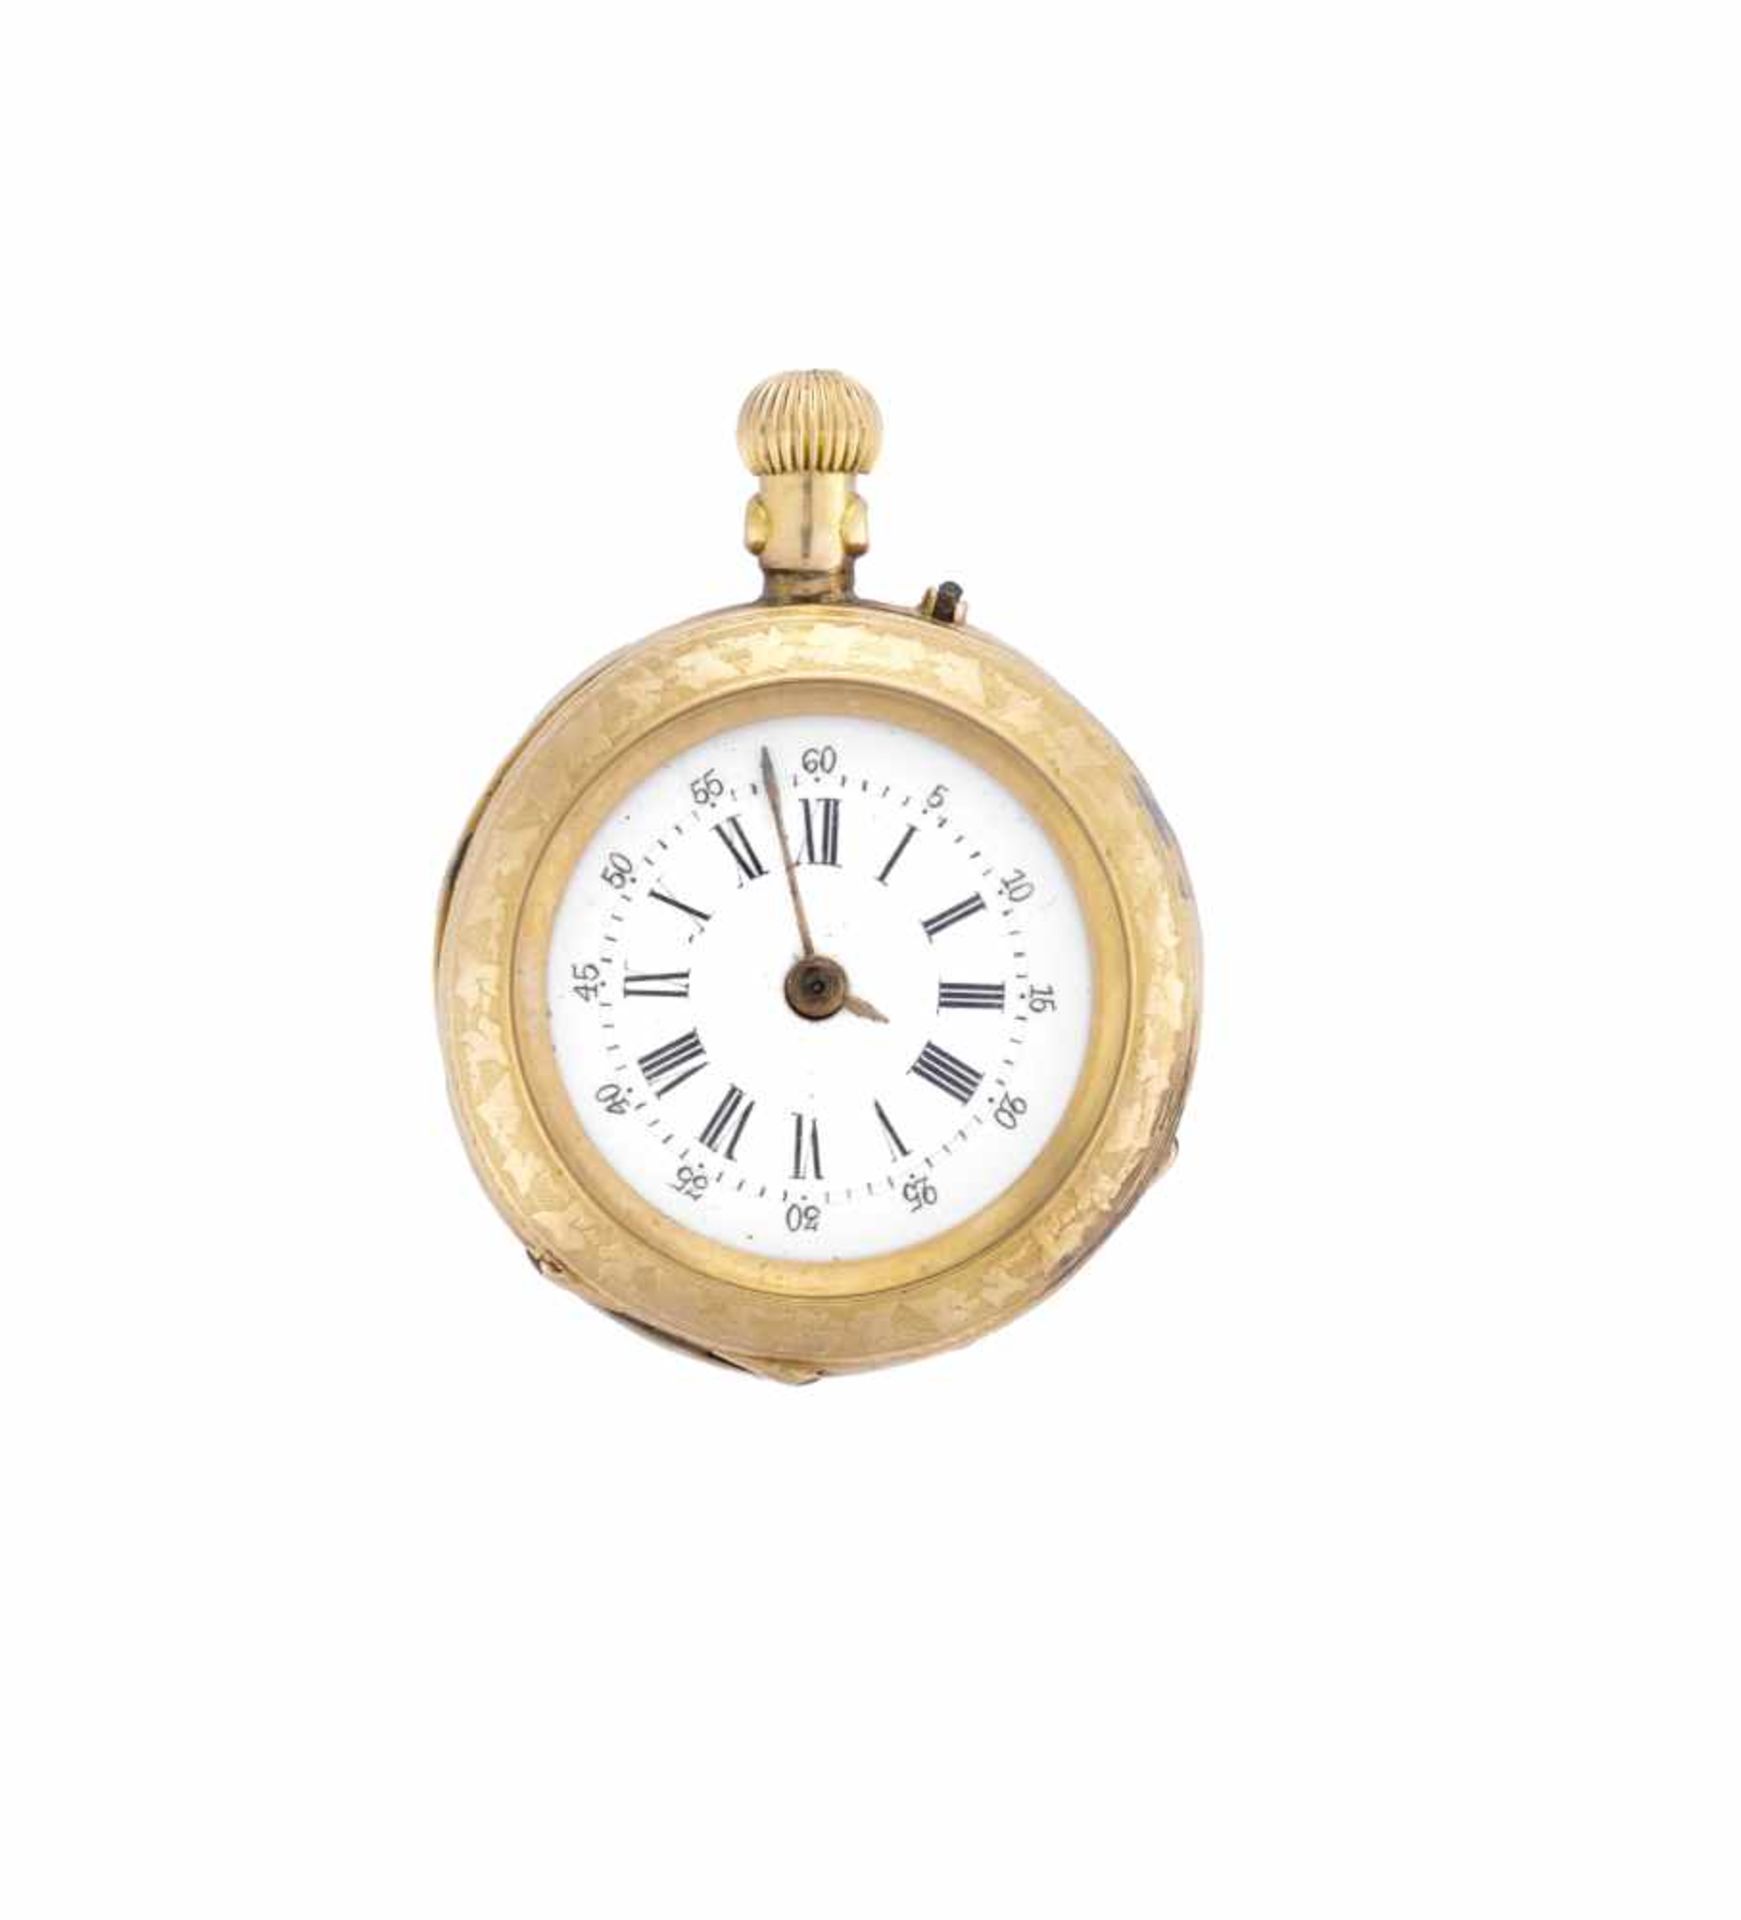 ANONYMOUSPink 18K gold pocket watchLate 19th centuryManual wind movementWhite dial with Roman